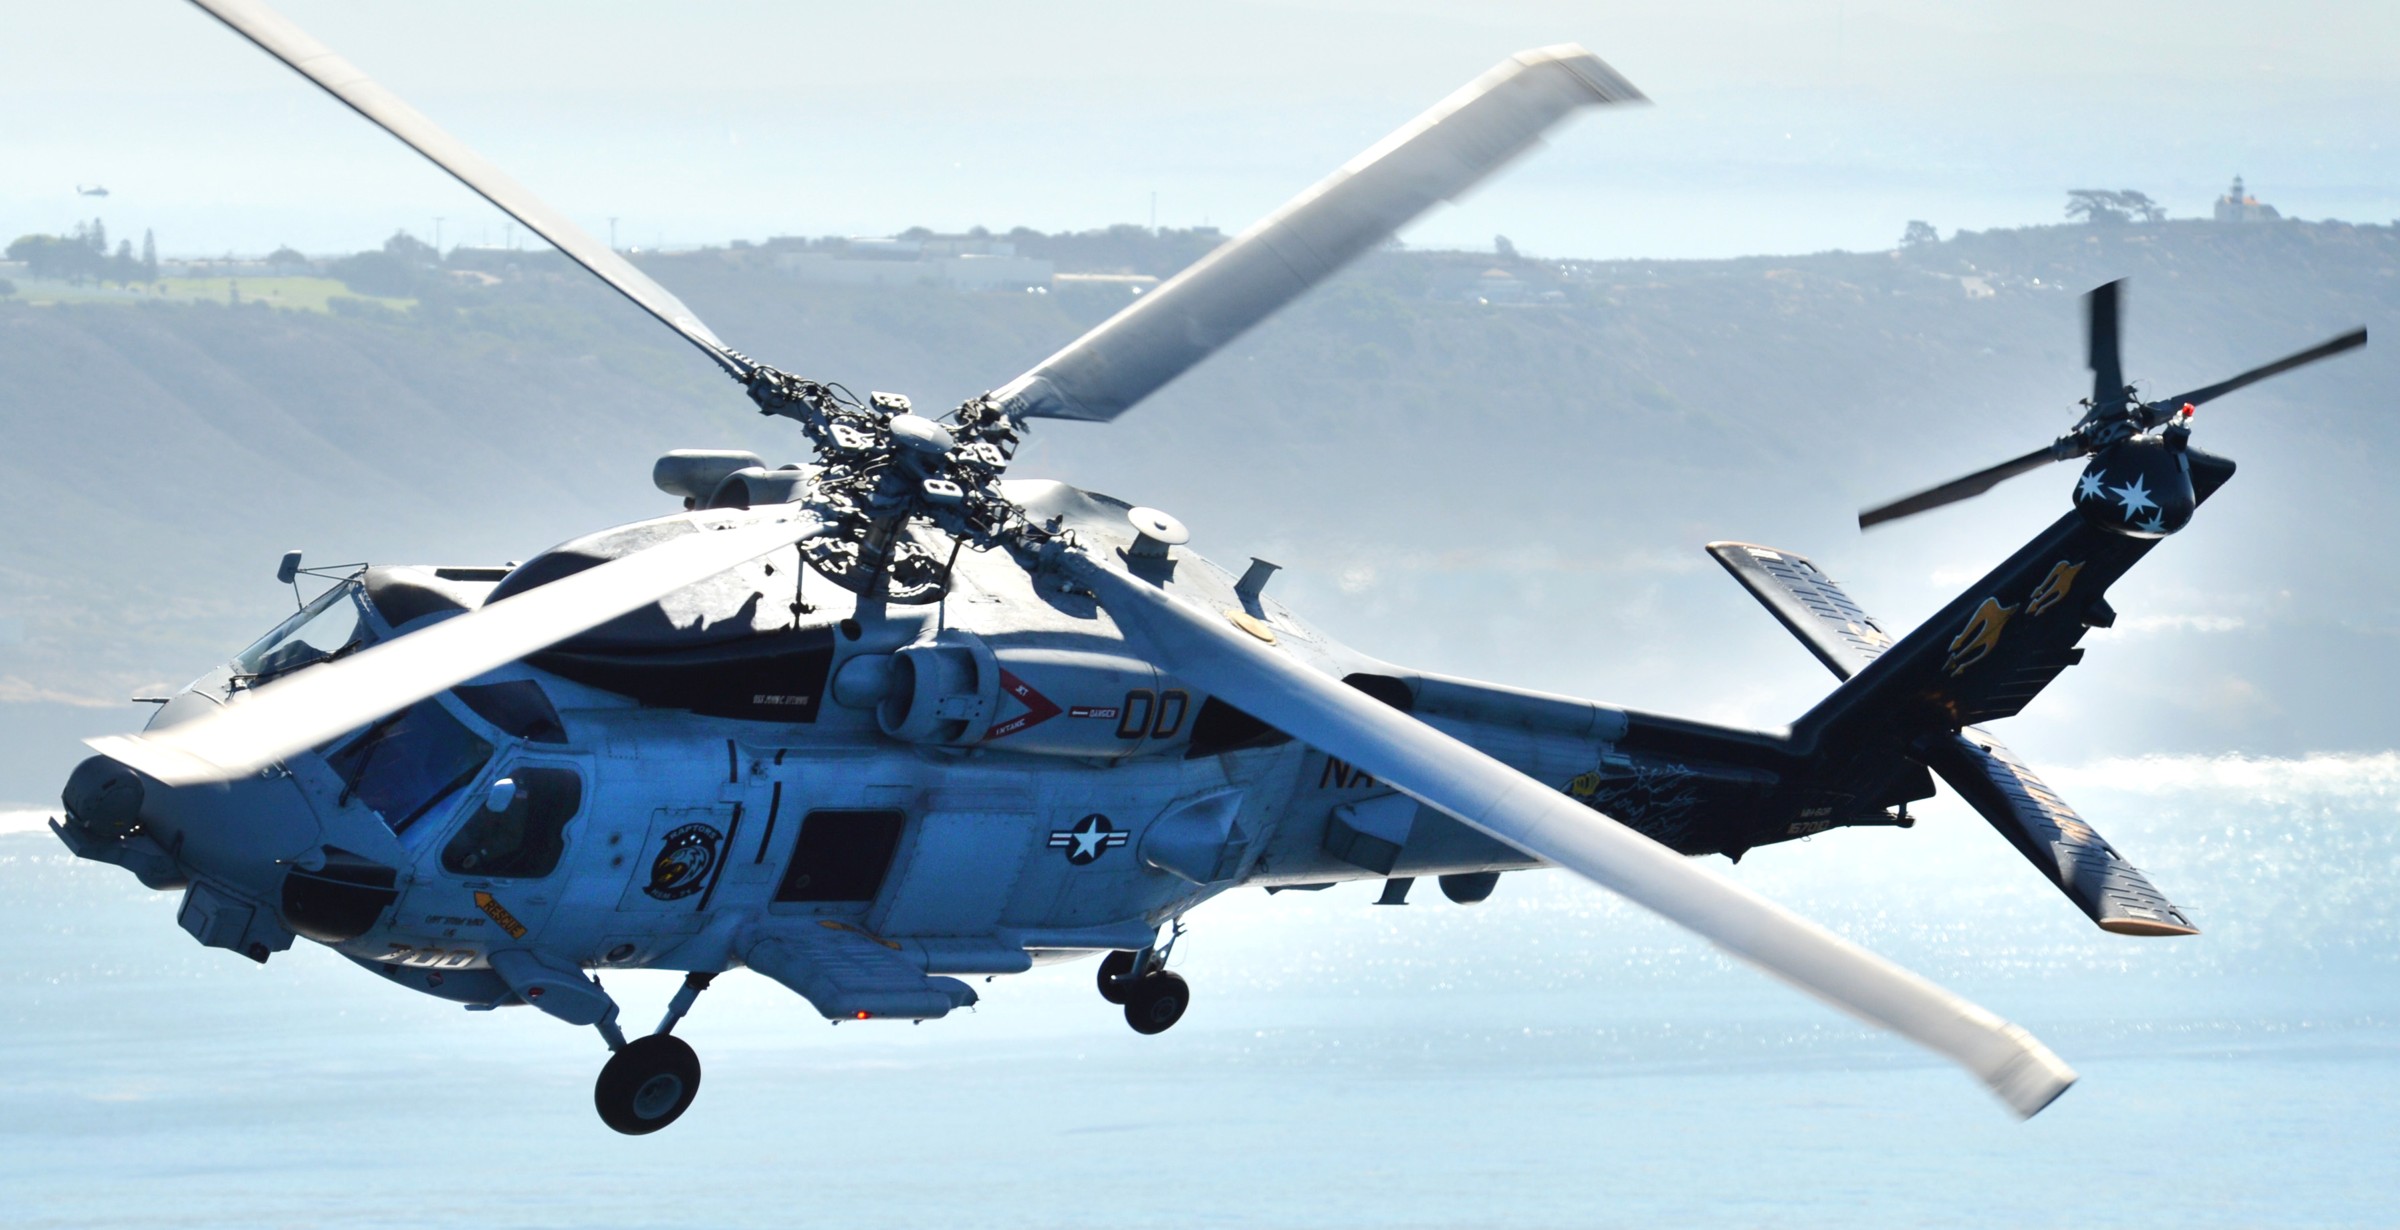 hsm-71 raptors helicopter maritime strike squadron mh-60r seahawk navy 2014 56